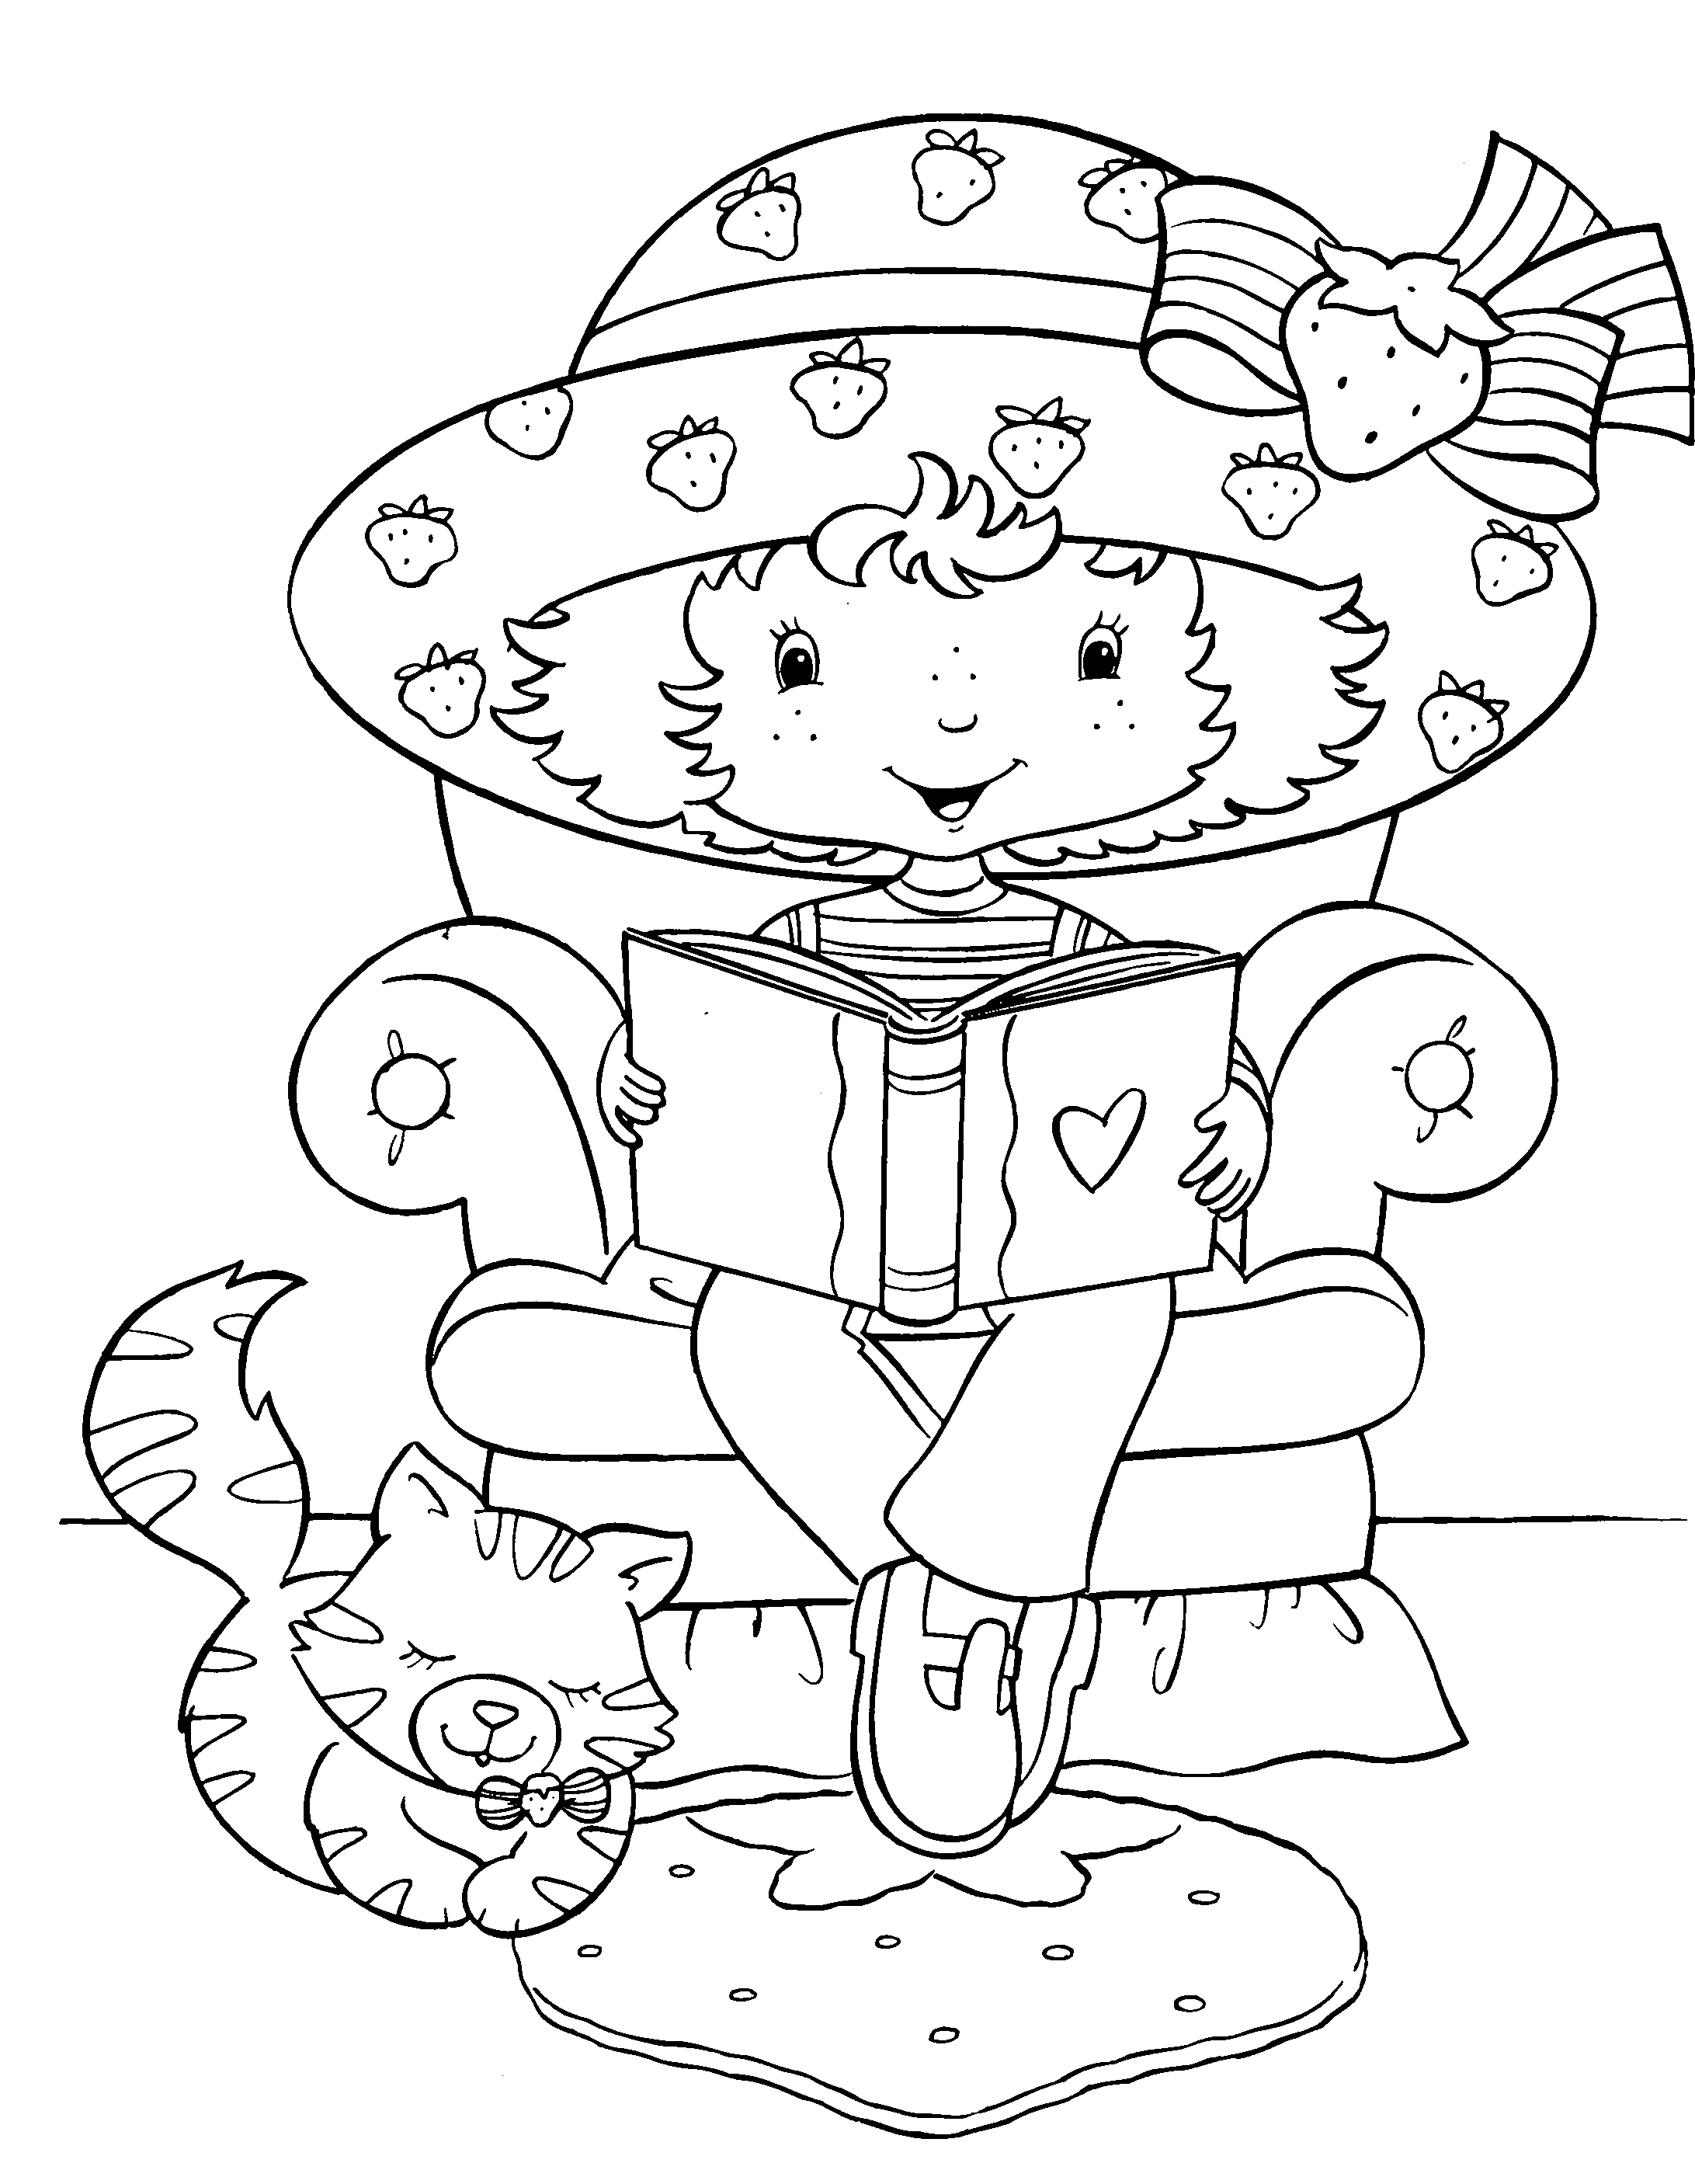 free-printable-strawberry-shortcake-coloring-pages-for-kids